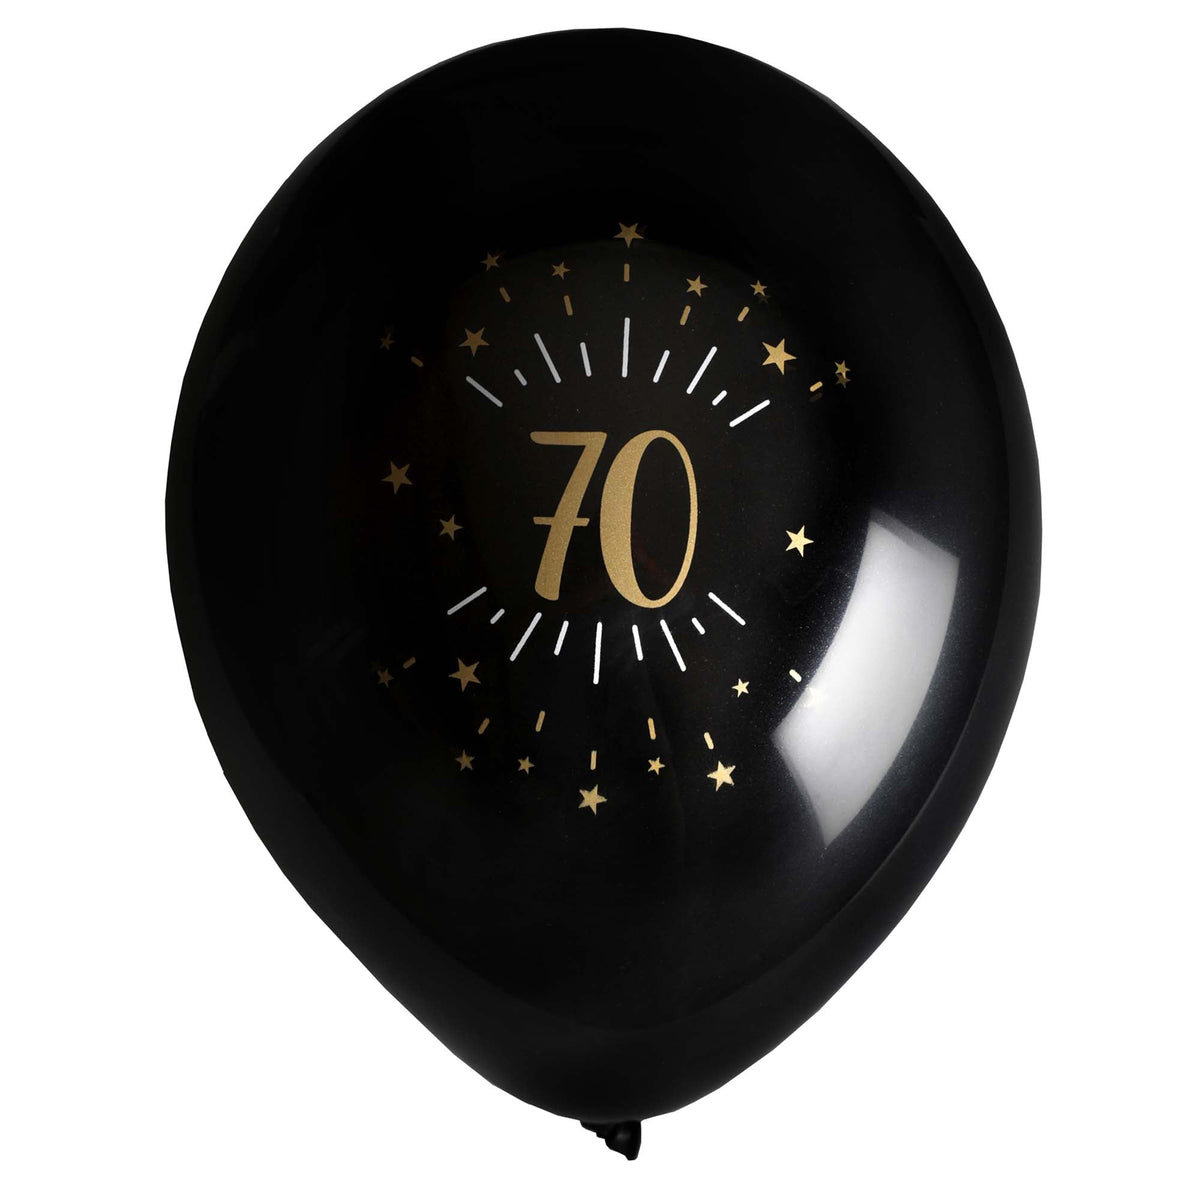 SANTEX Age Specific Birthday Black and Gold 70th Birthday Latex Balloons, 12 Inches, 6 Count 3660380070443